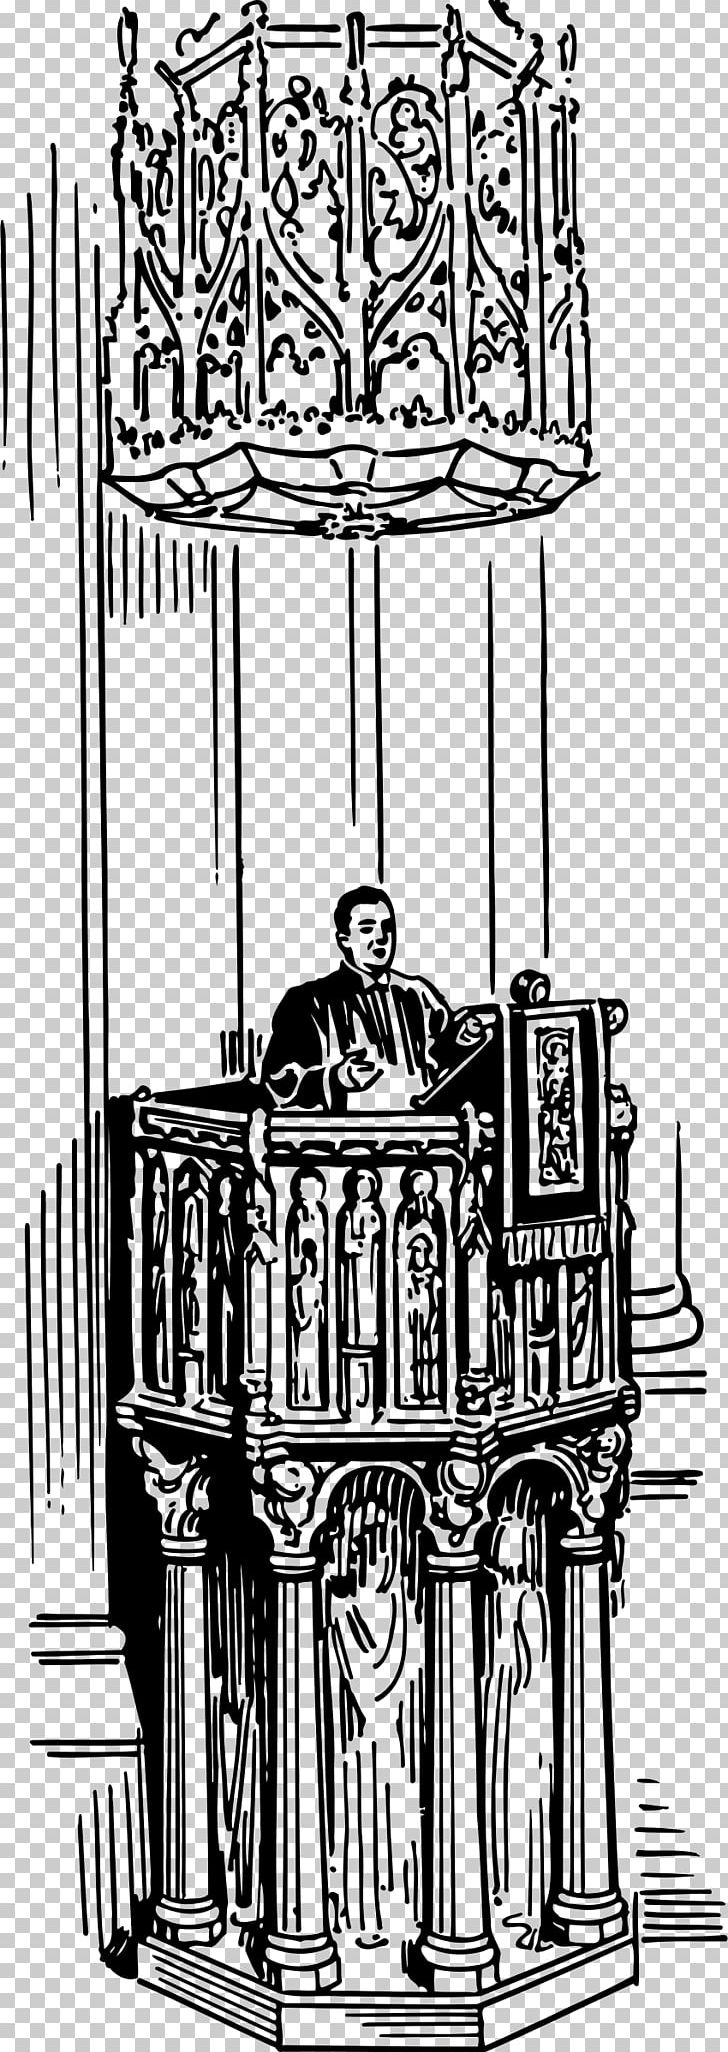 Pulpit Preacher Church Clergy PNG, Clipart, Arch, Black And White, Christian, Christian Church, Christianity Free PNG Download